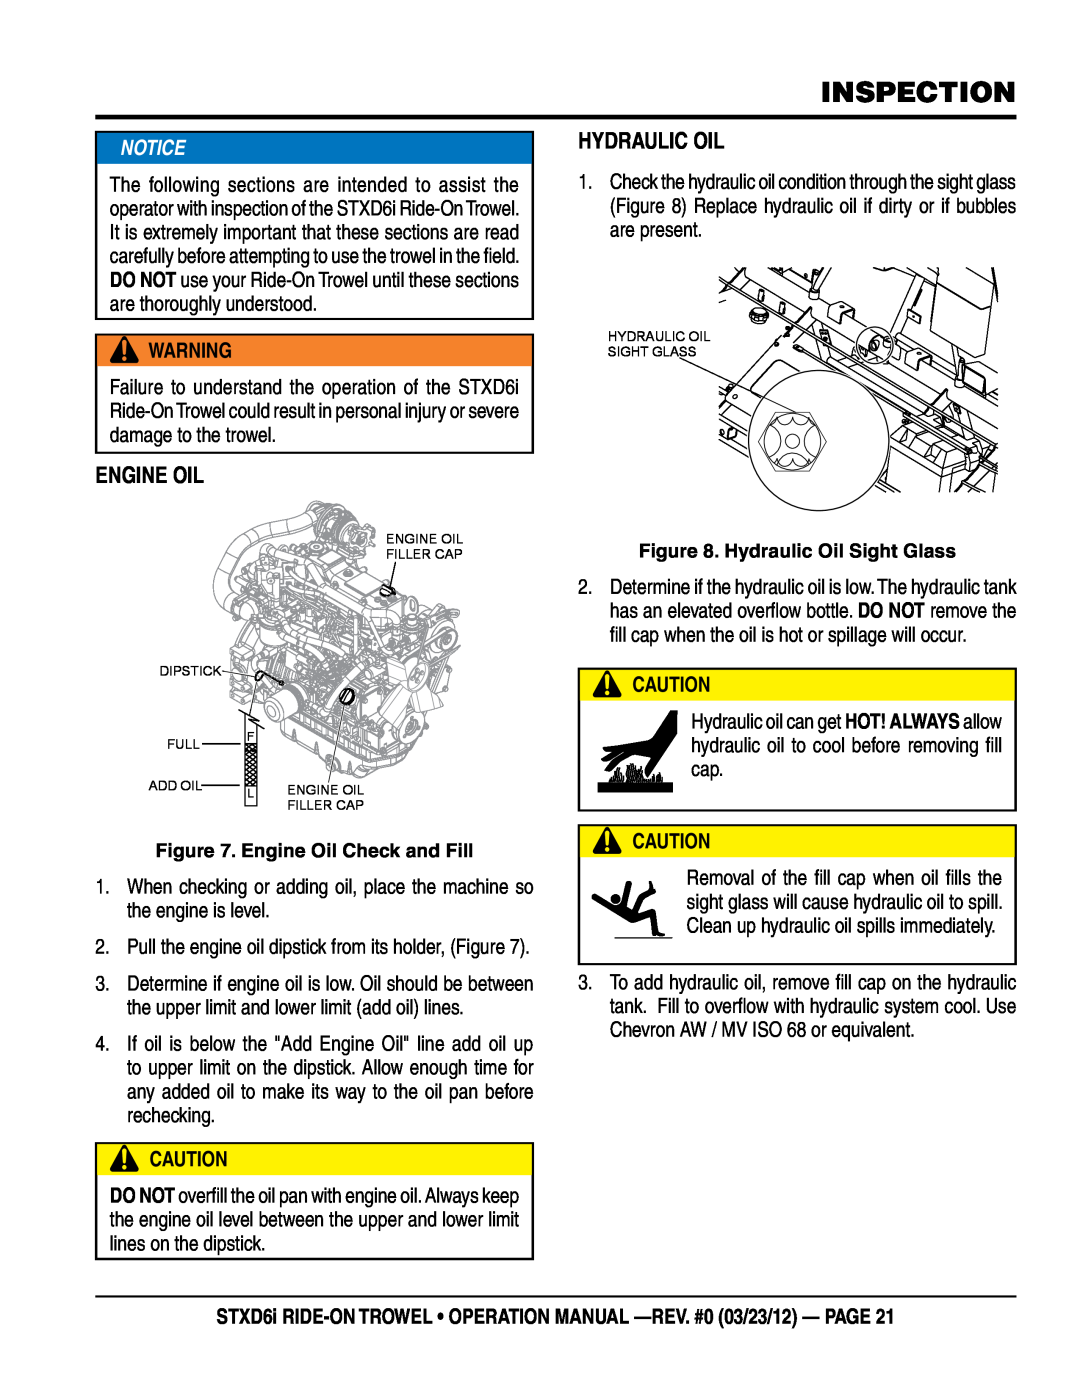 Multiquip inspection, Engine Oil, Hydraulic Oil, STXD6i RIDE-ON TROWEL operation manual -rev. #0 03/23/12 - page 